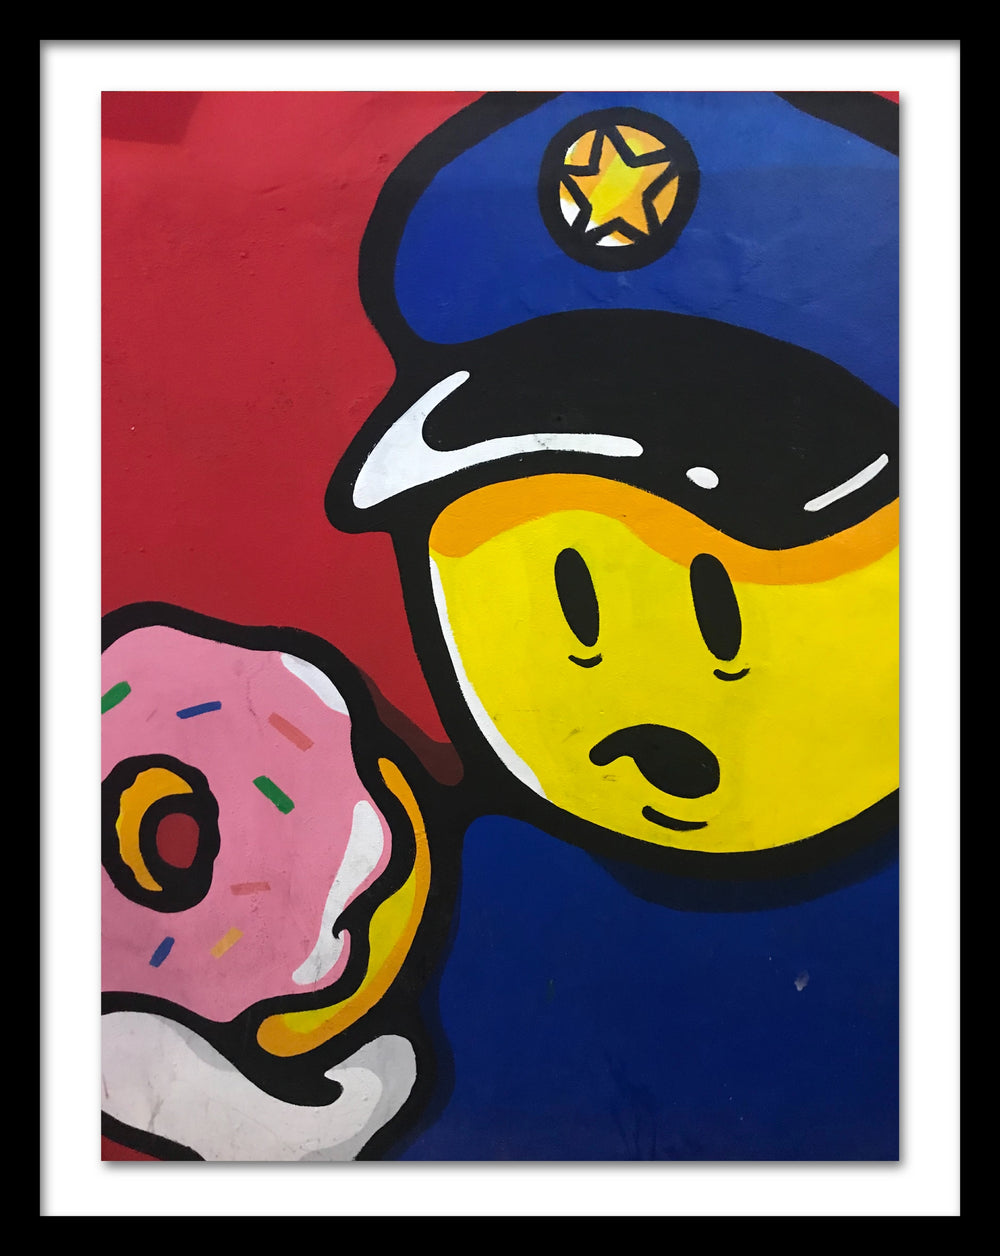 A poster in a black frame that depicts a policeman holding a doughnut